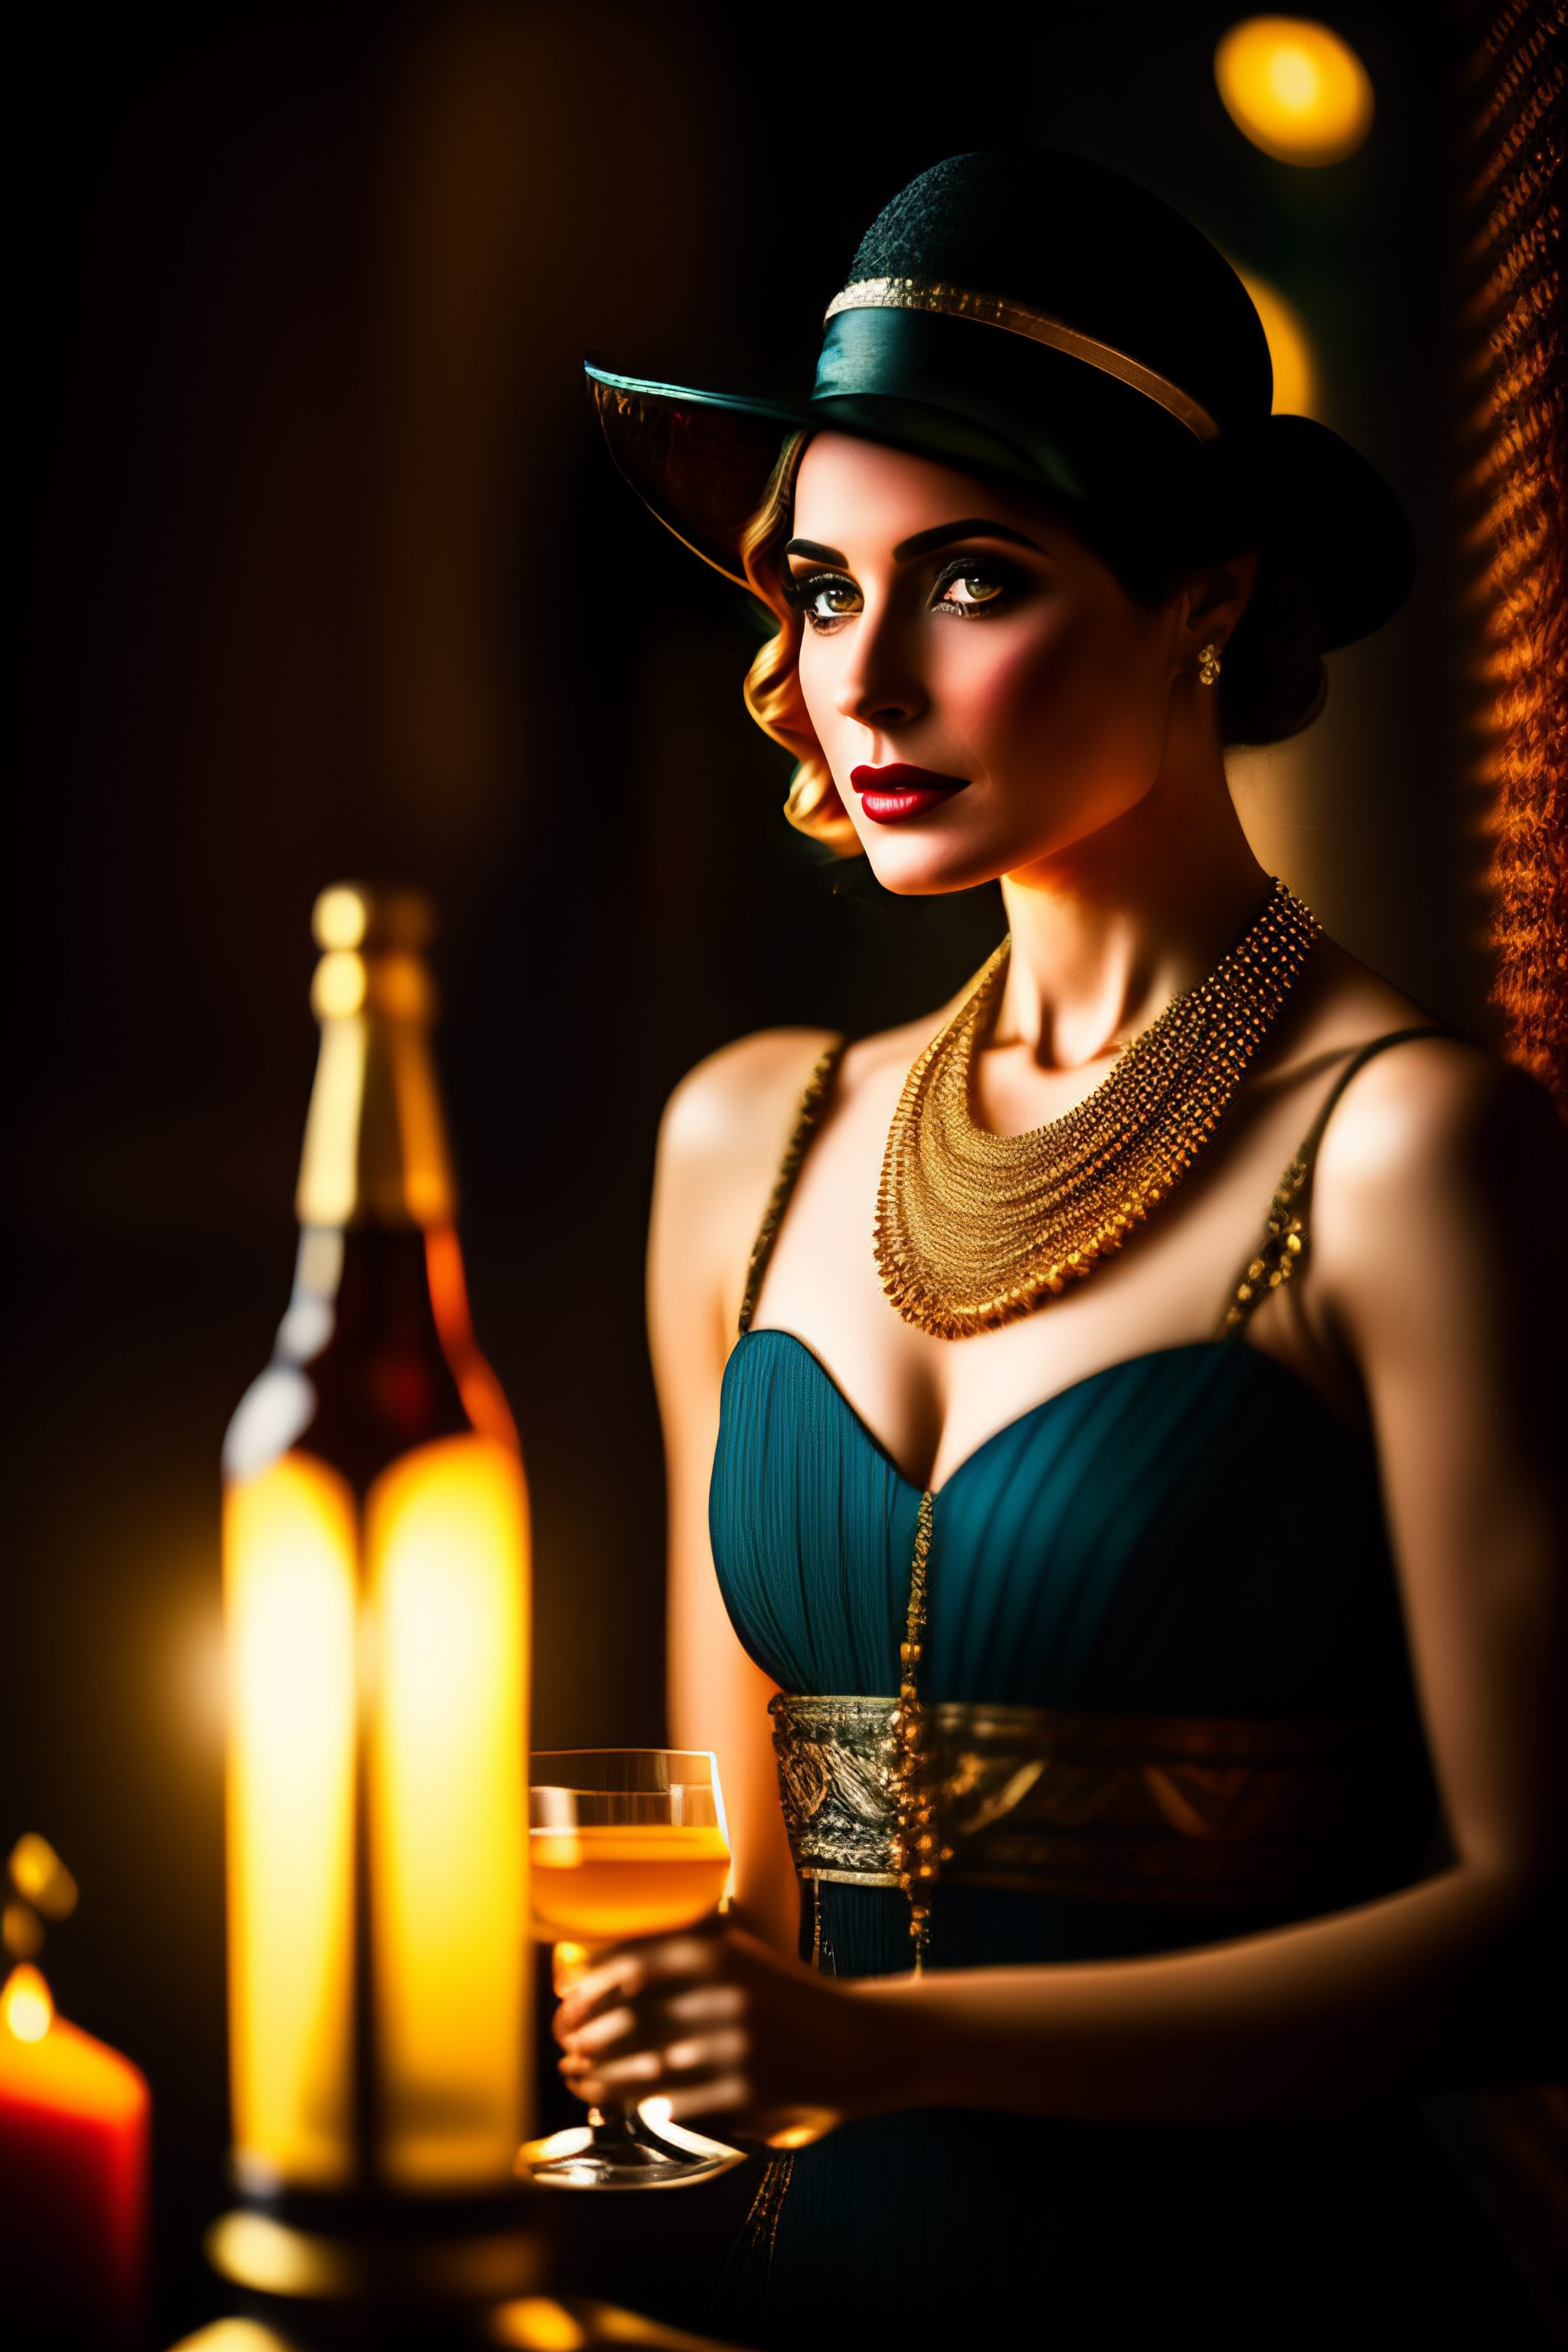 Lexica - A beautiful classy partying women, dimly lit upscale 1920s ...